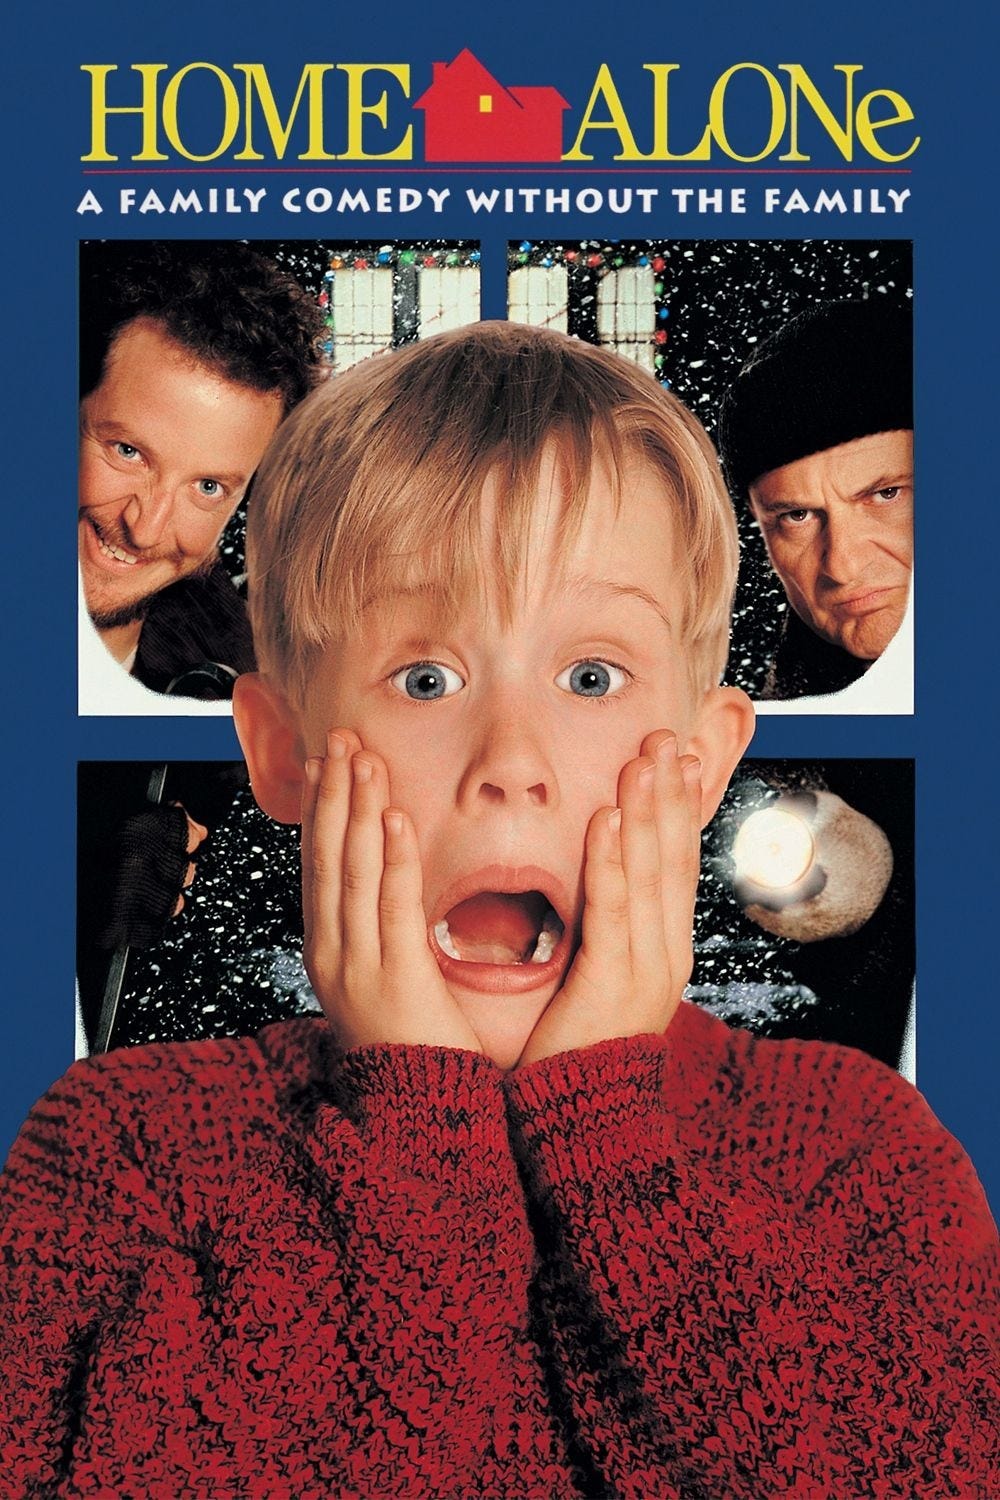 Images as Narratives: The Home Alone Movie Poster